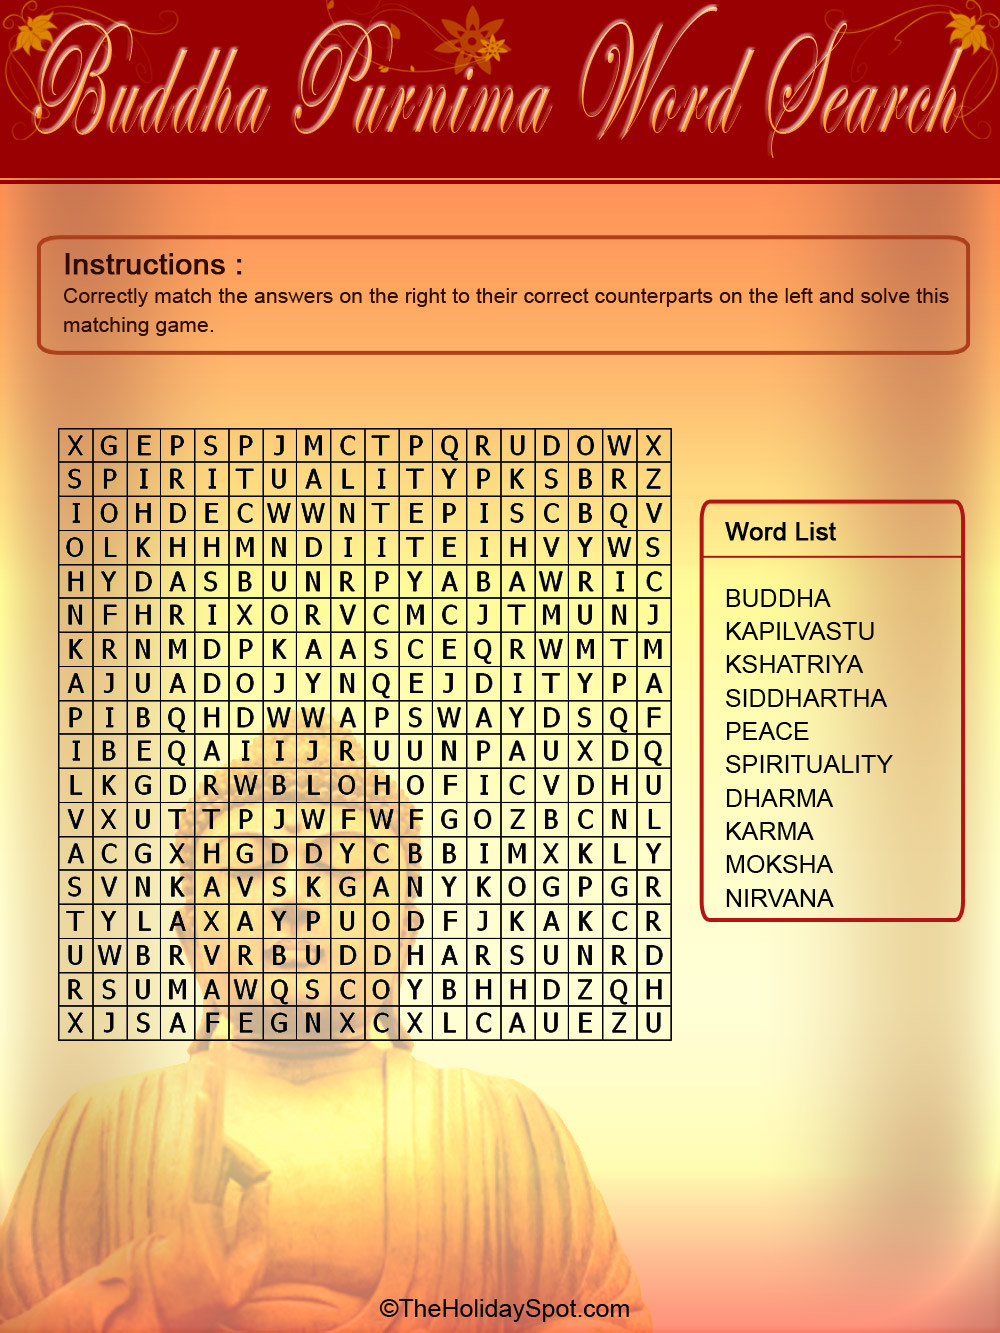 Color Word Search Puzzle Template for Buddha Purnima